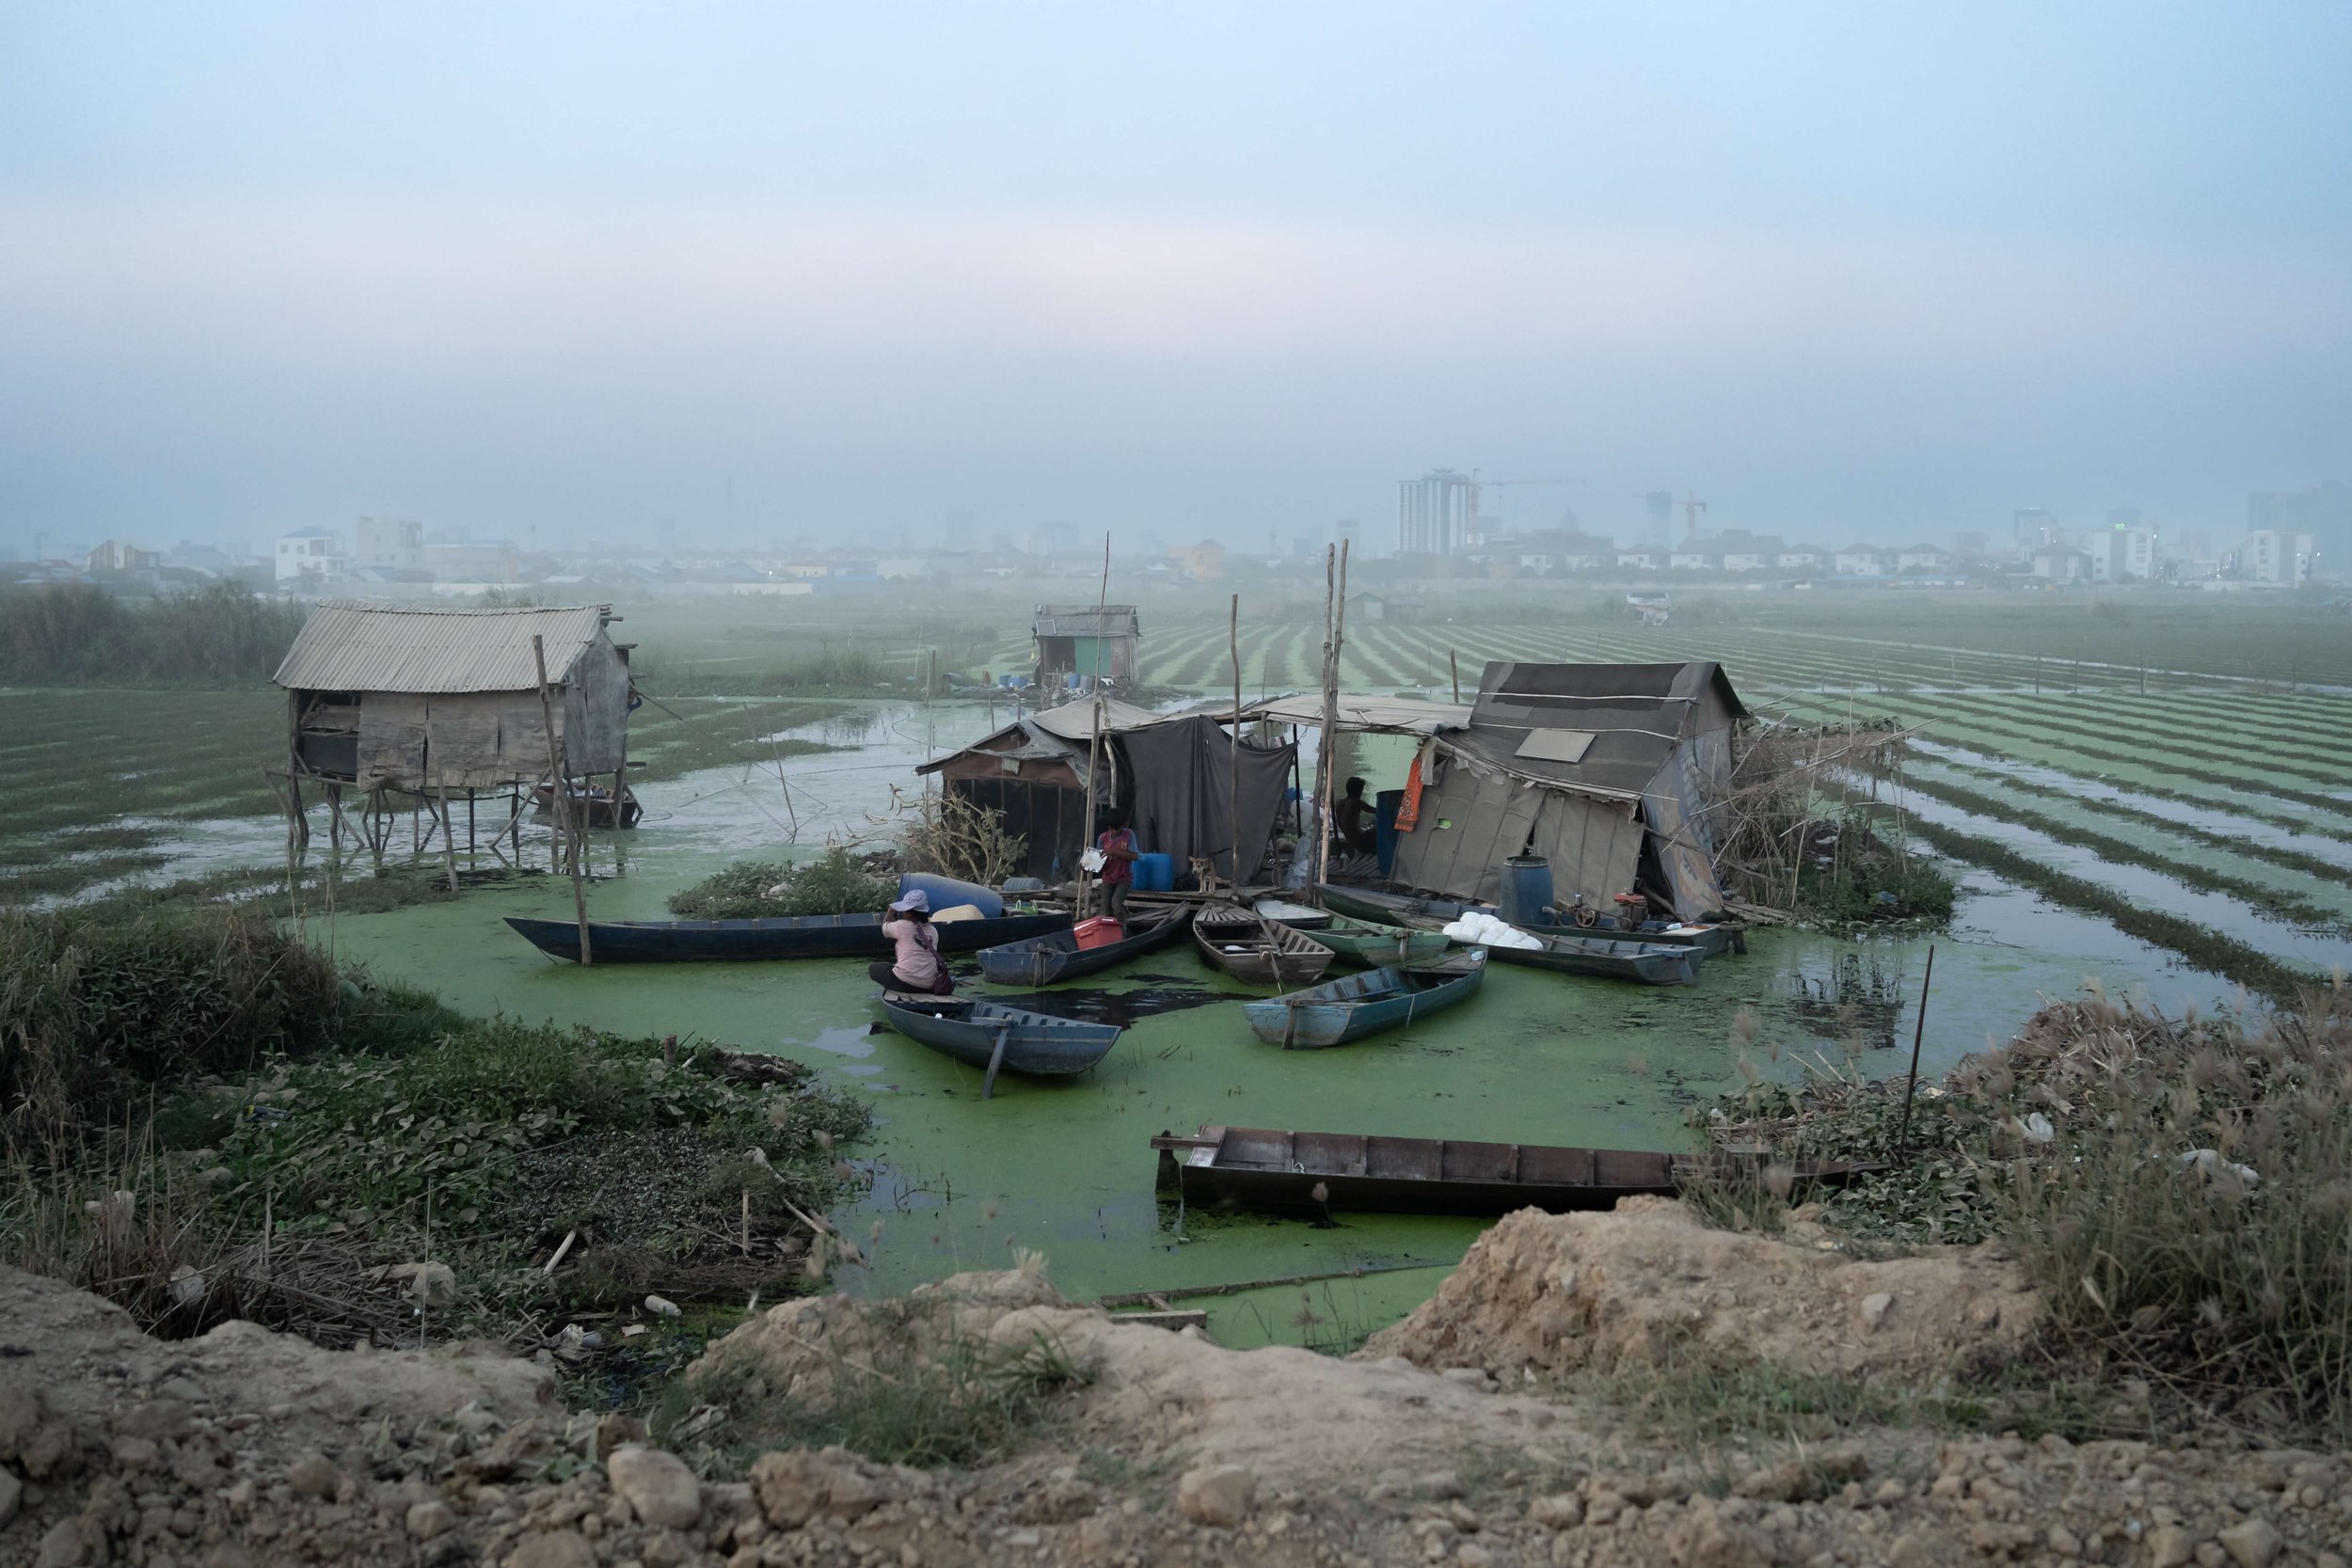  The houses of morning glory and mimosa farmers near a filled in section of the Boeung Tompun wetlands at dusk. As a result of the filling in of much of Phnom Penh’s lakes and wetlands, evictions have become commonplace. Most notably, the filling in 